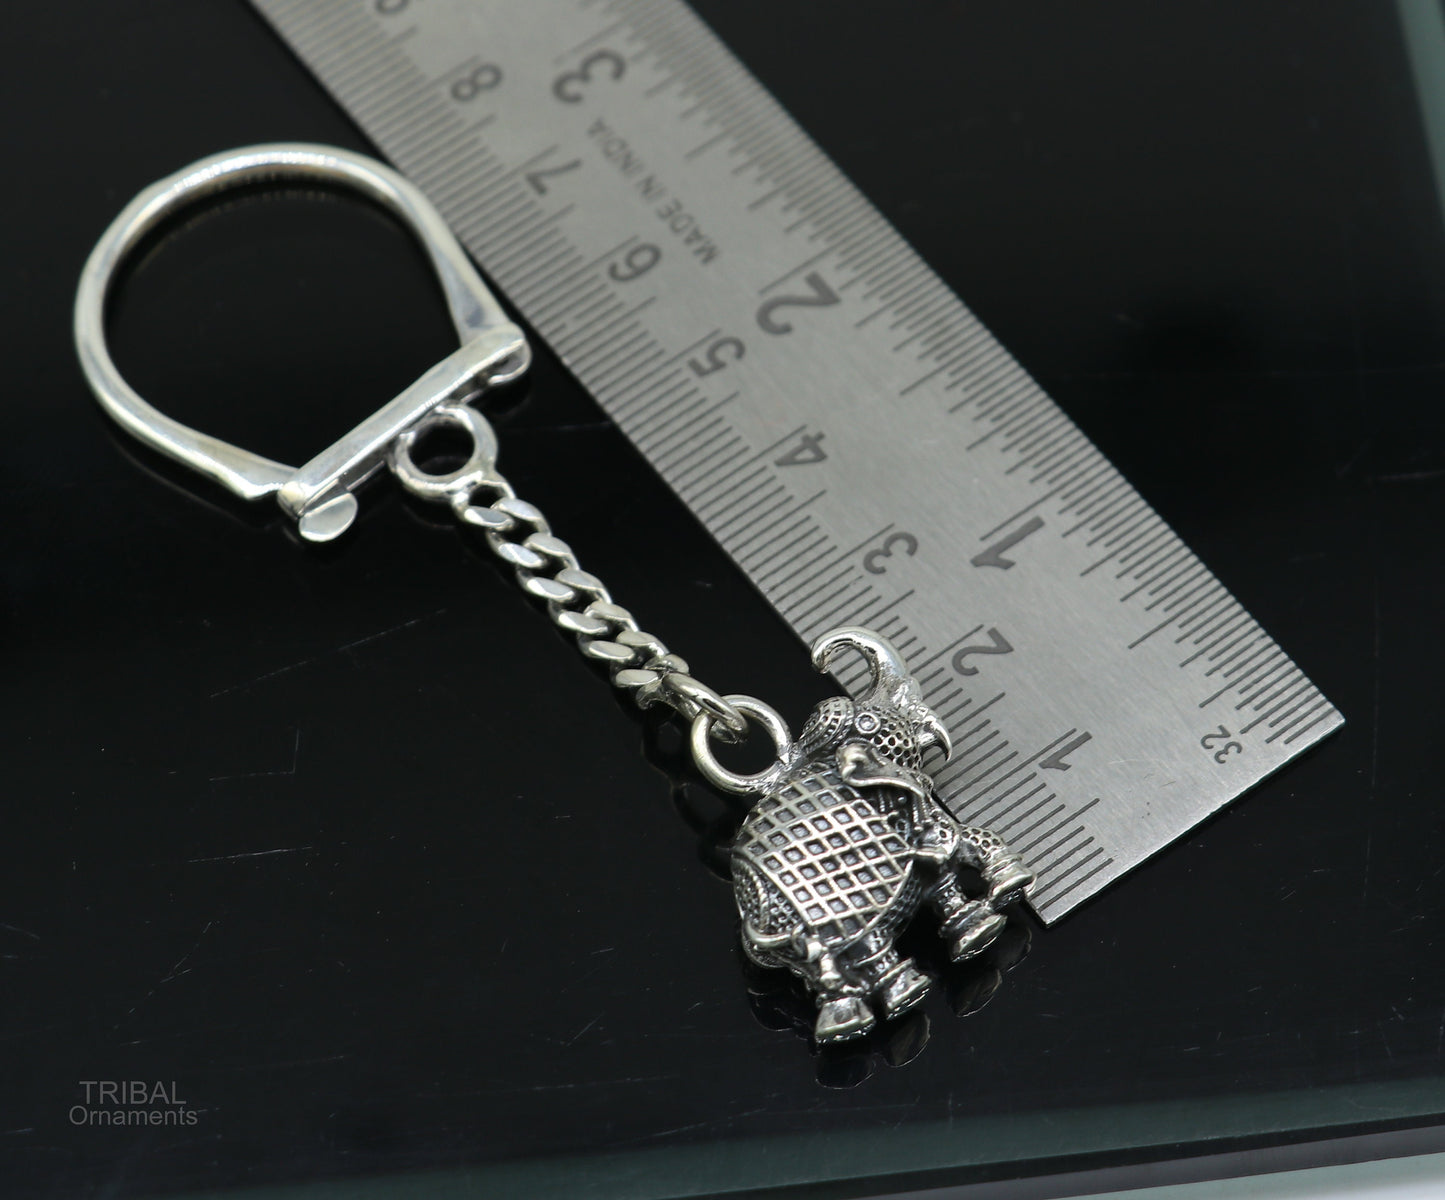 925 Sterling silver handmade unique vintage elephant design solid key chian, stylish royal gifting silver accessories unisex gift kch10 - TRIBAL ORNAMENTS